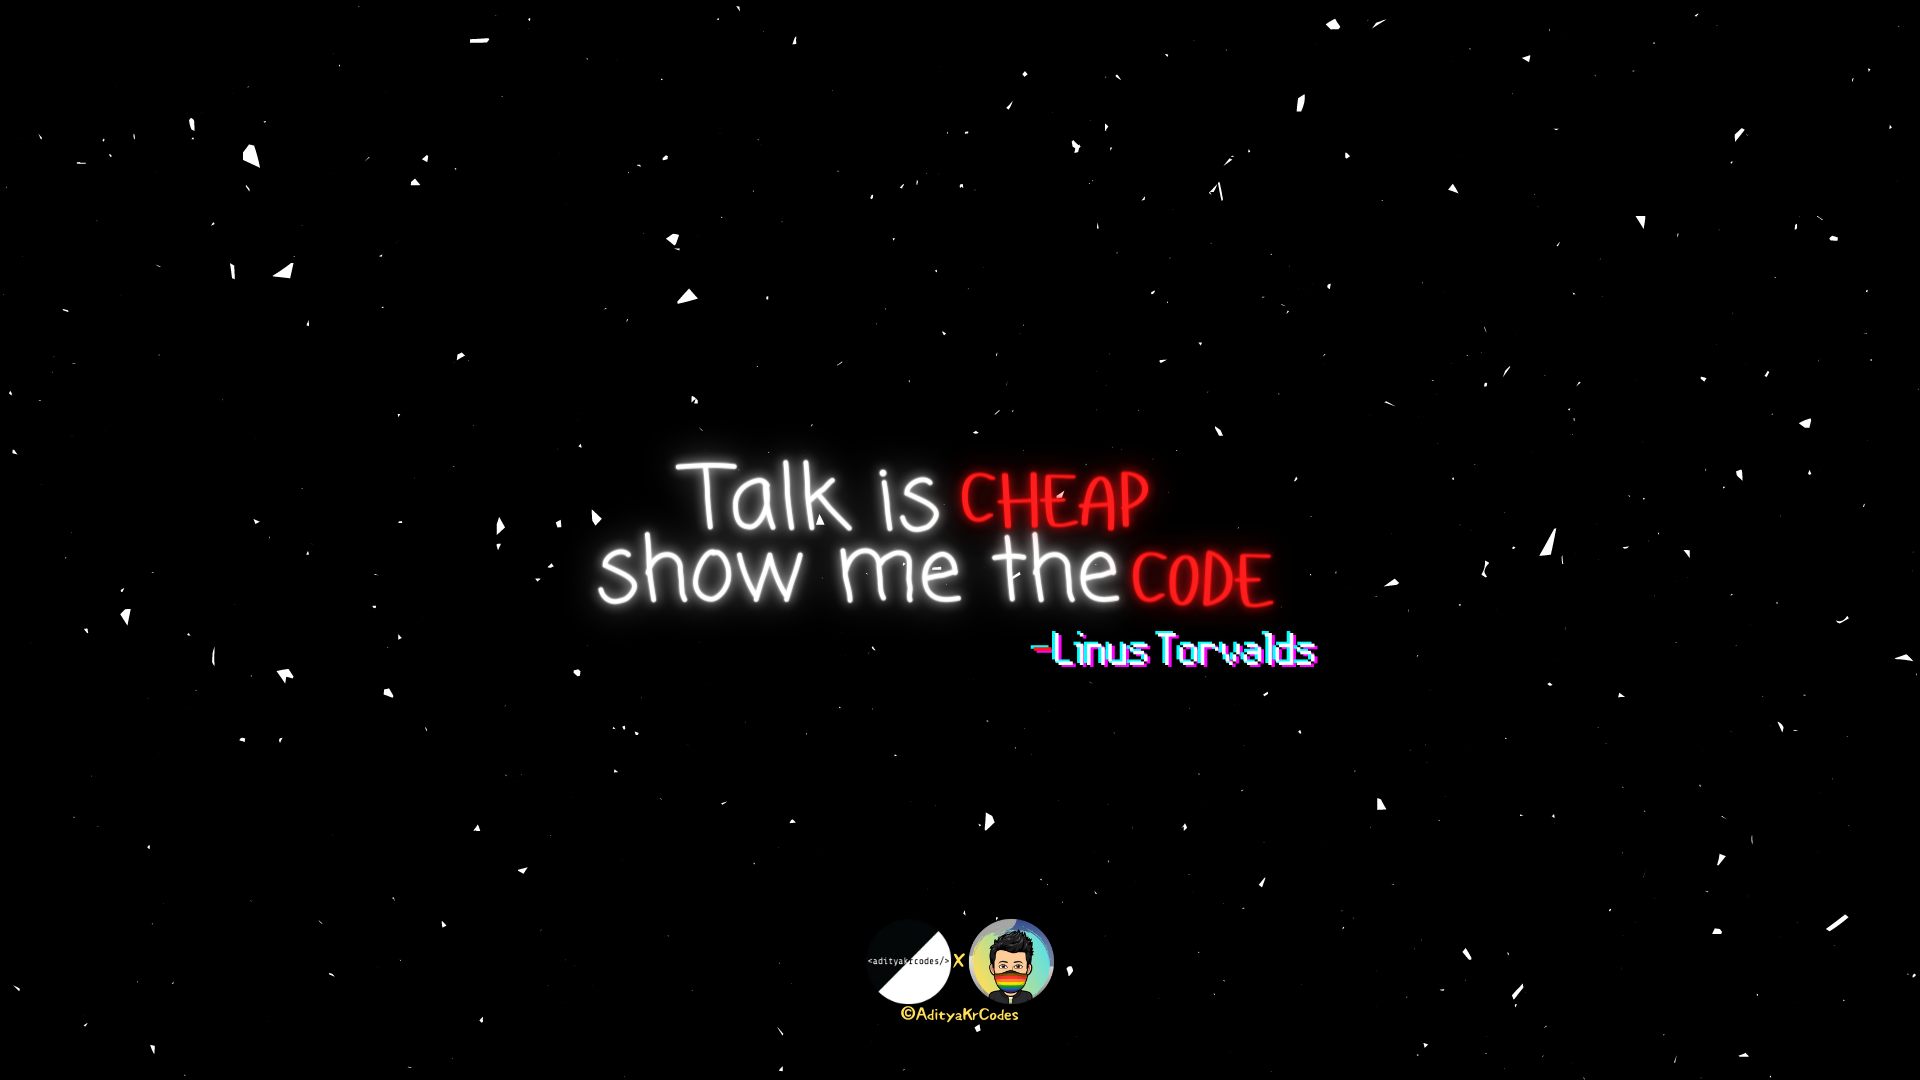 Talk is cheap, show me the code by adityakrcodes